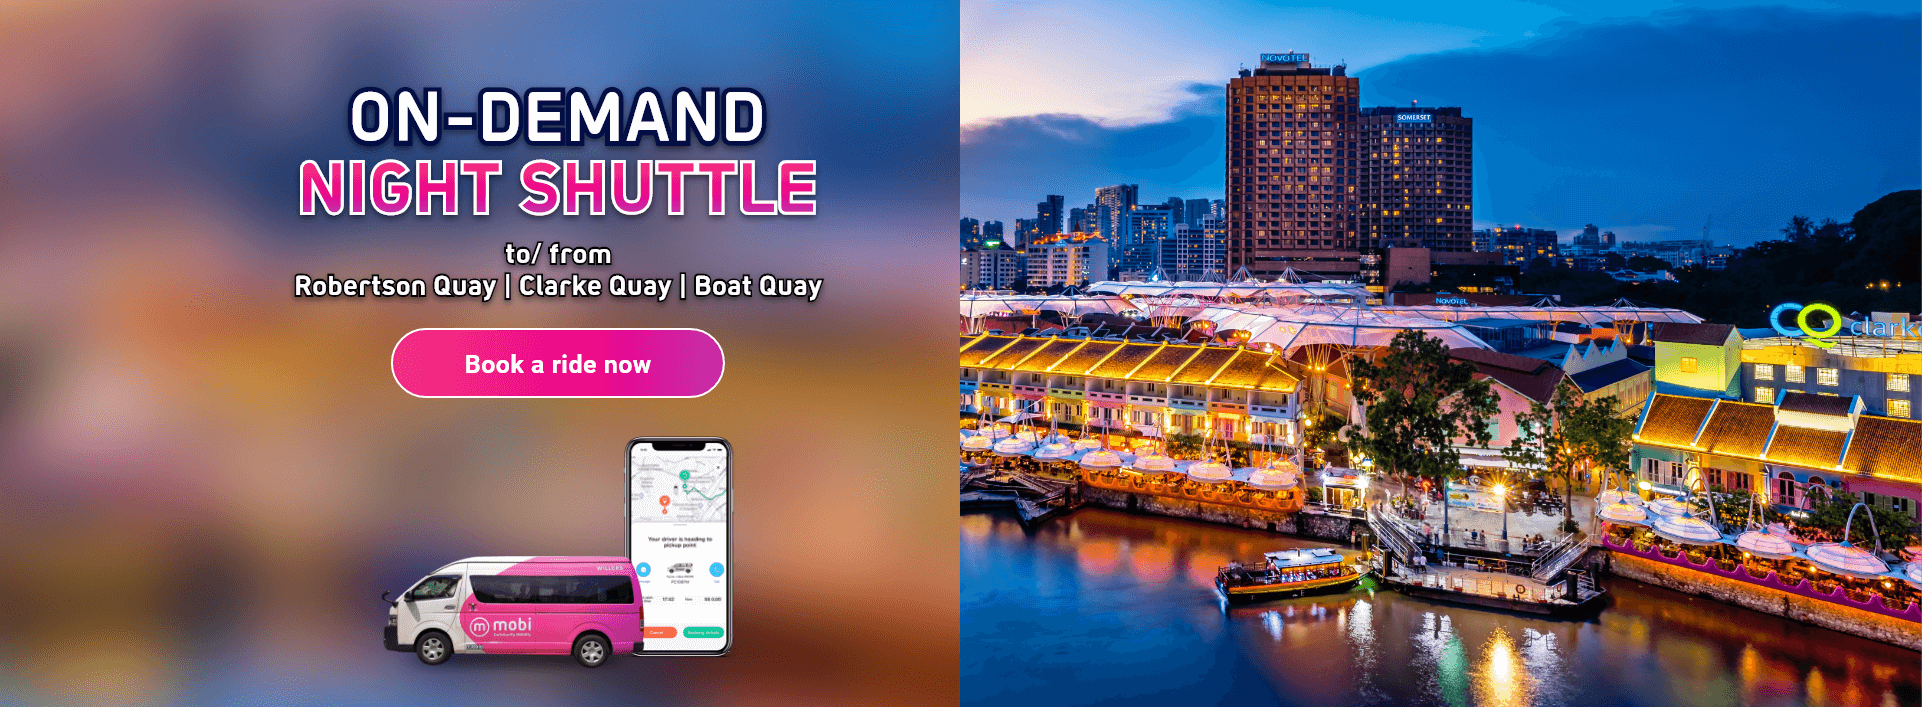 ON-DEMAND NIGHT SHUTTLE from Robertson Quay or Boat Quay